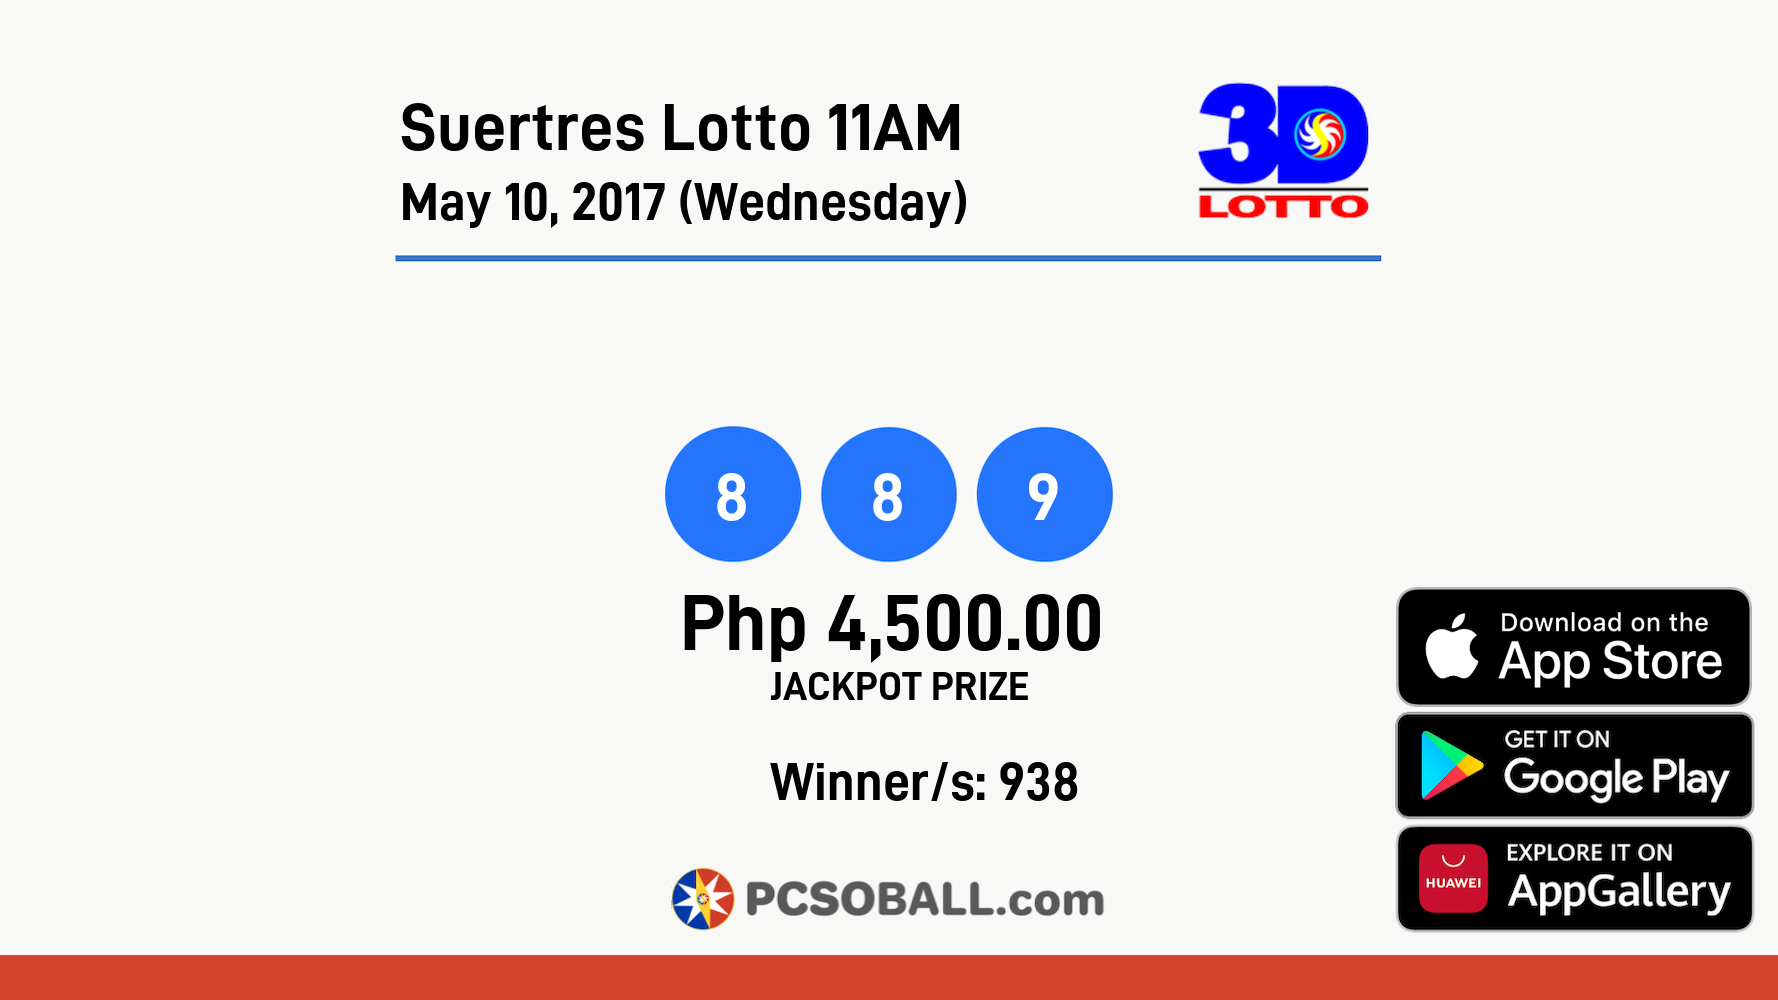 Suertres Lotto 11AM May 10, 2017 (Wednesday) Result